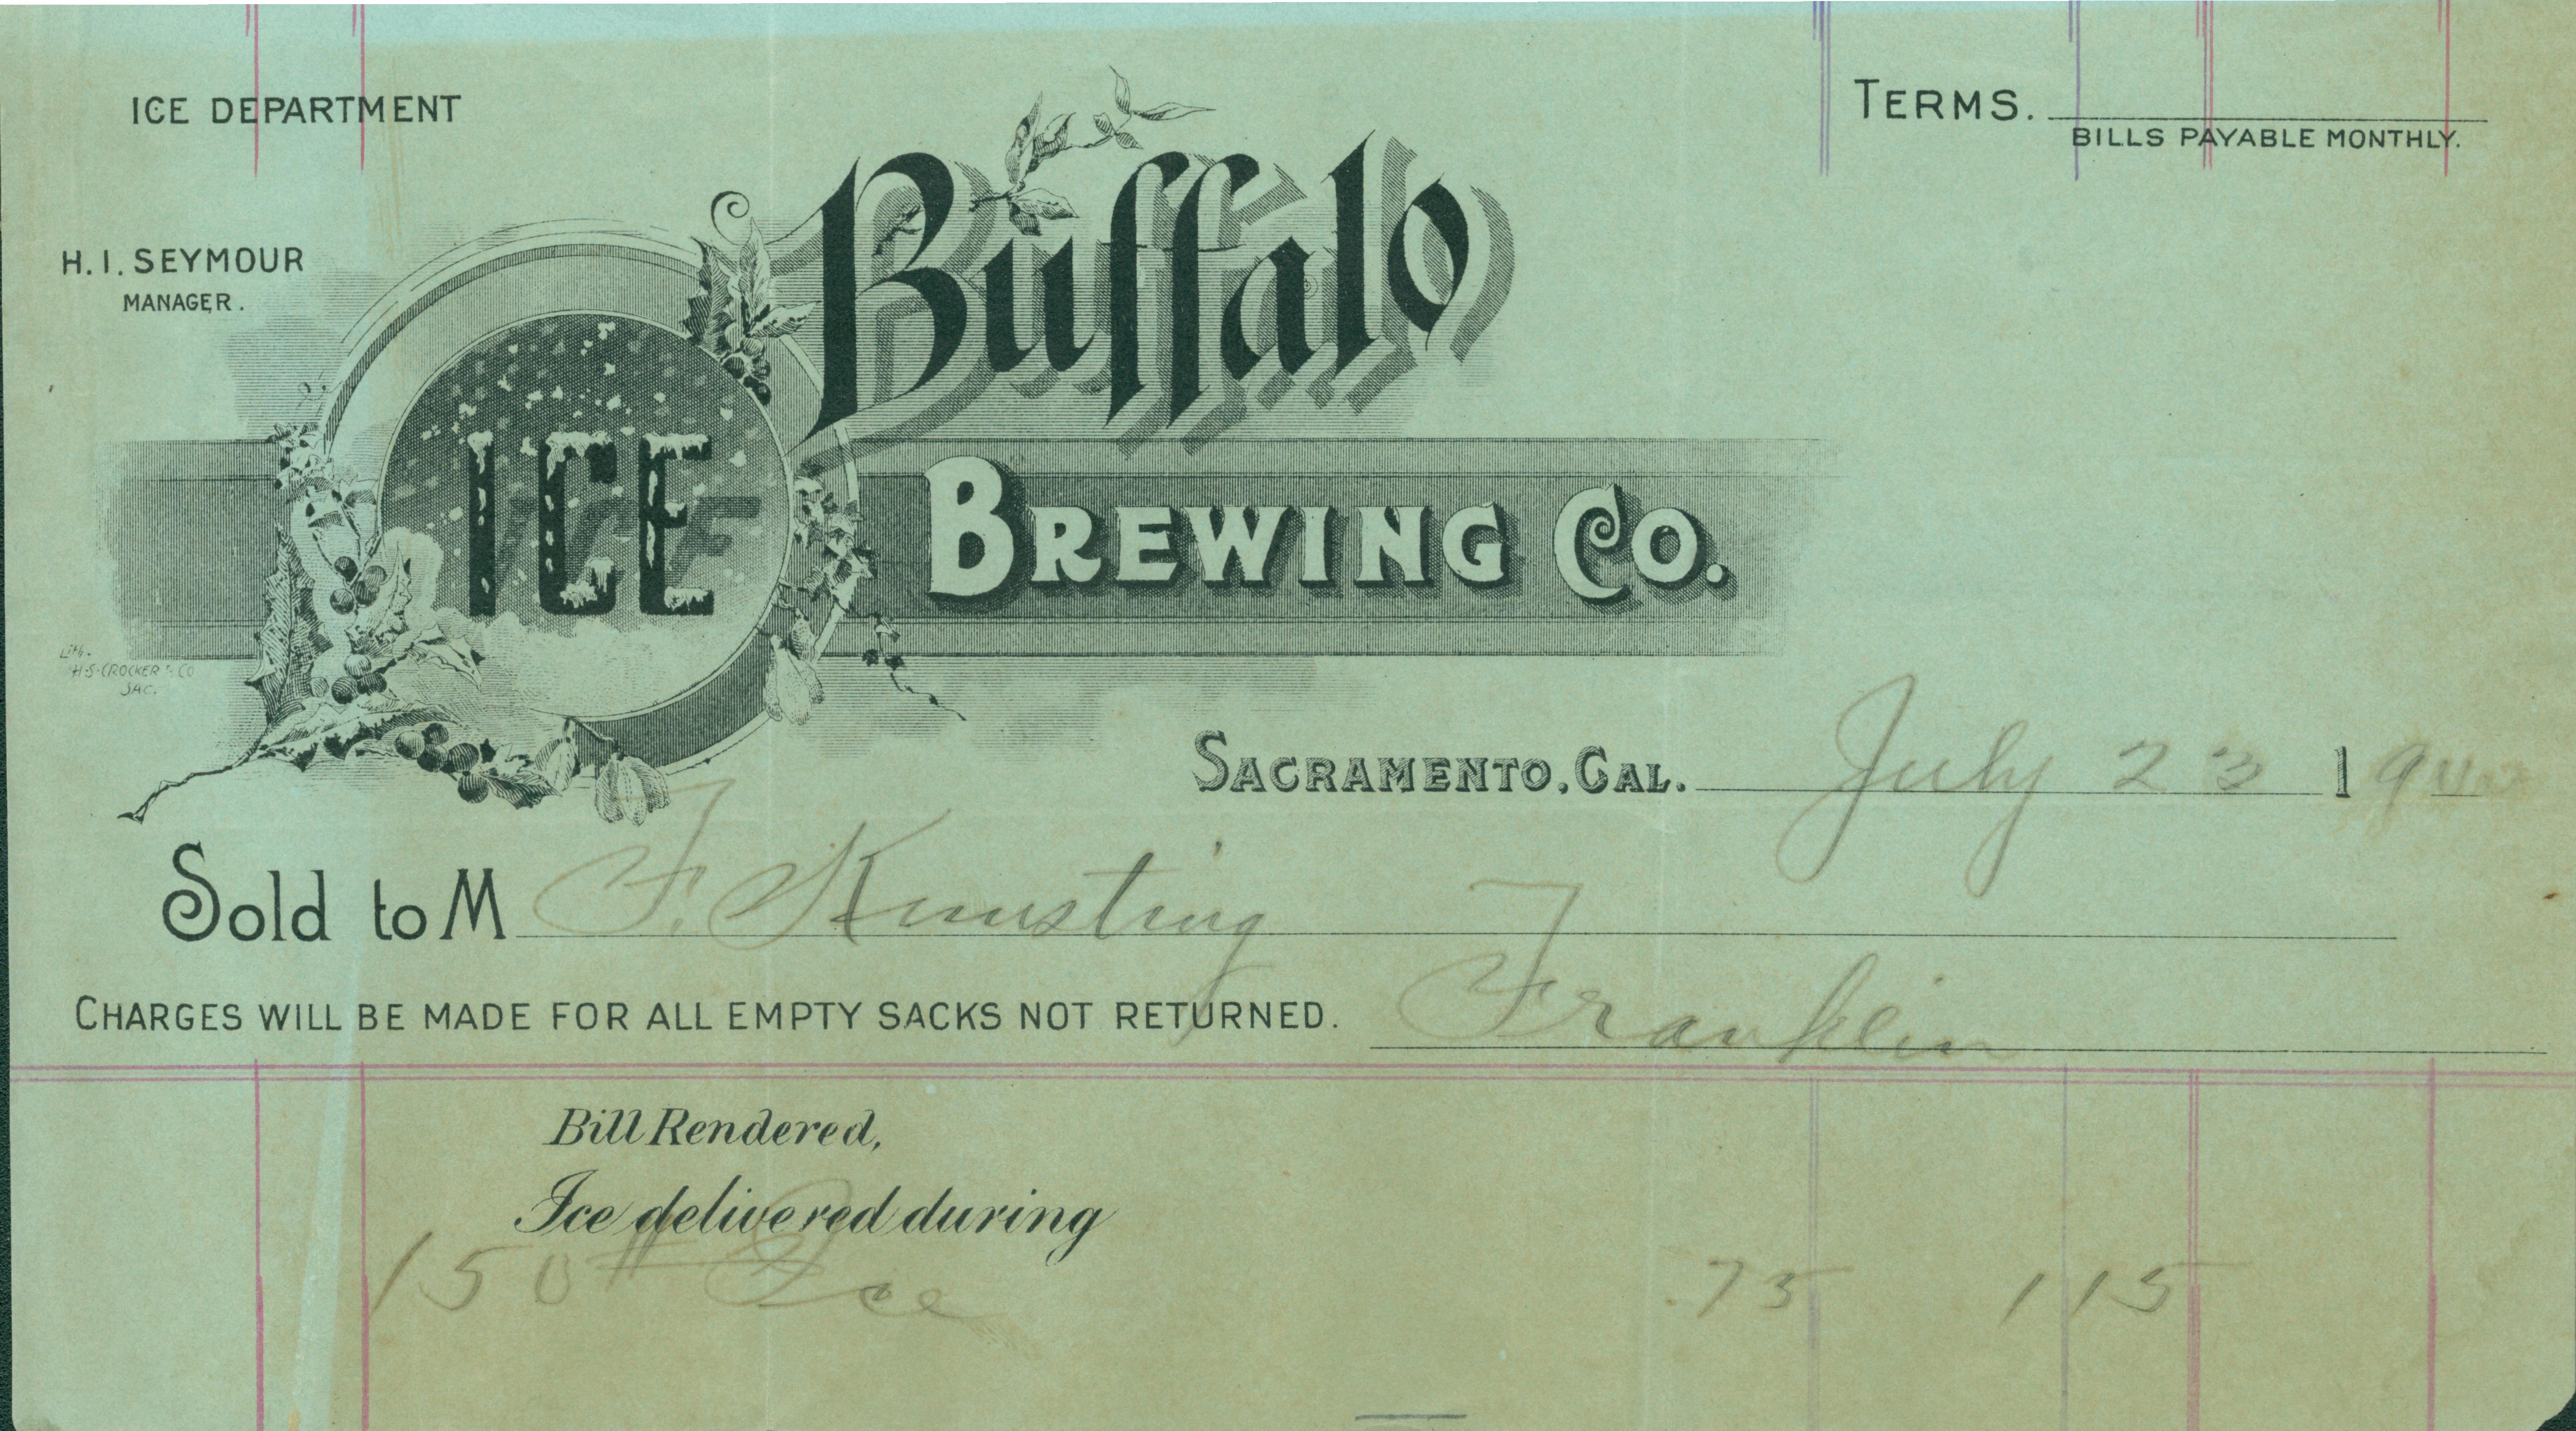 This receipt shows information about an ice order Kunsting made with the Buffalo Brewing Company Ice Department in 1900.